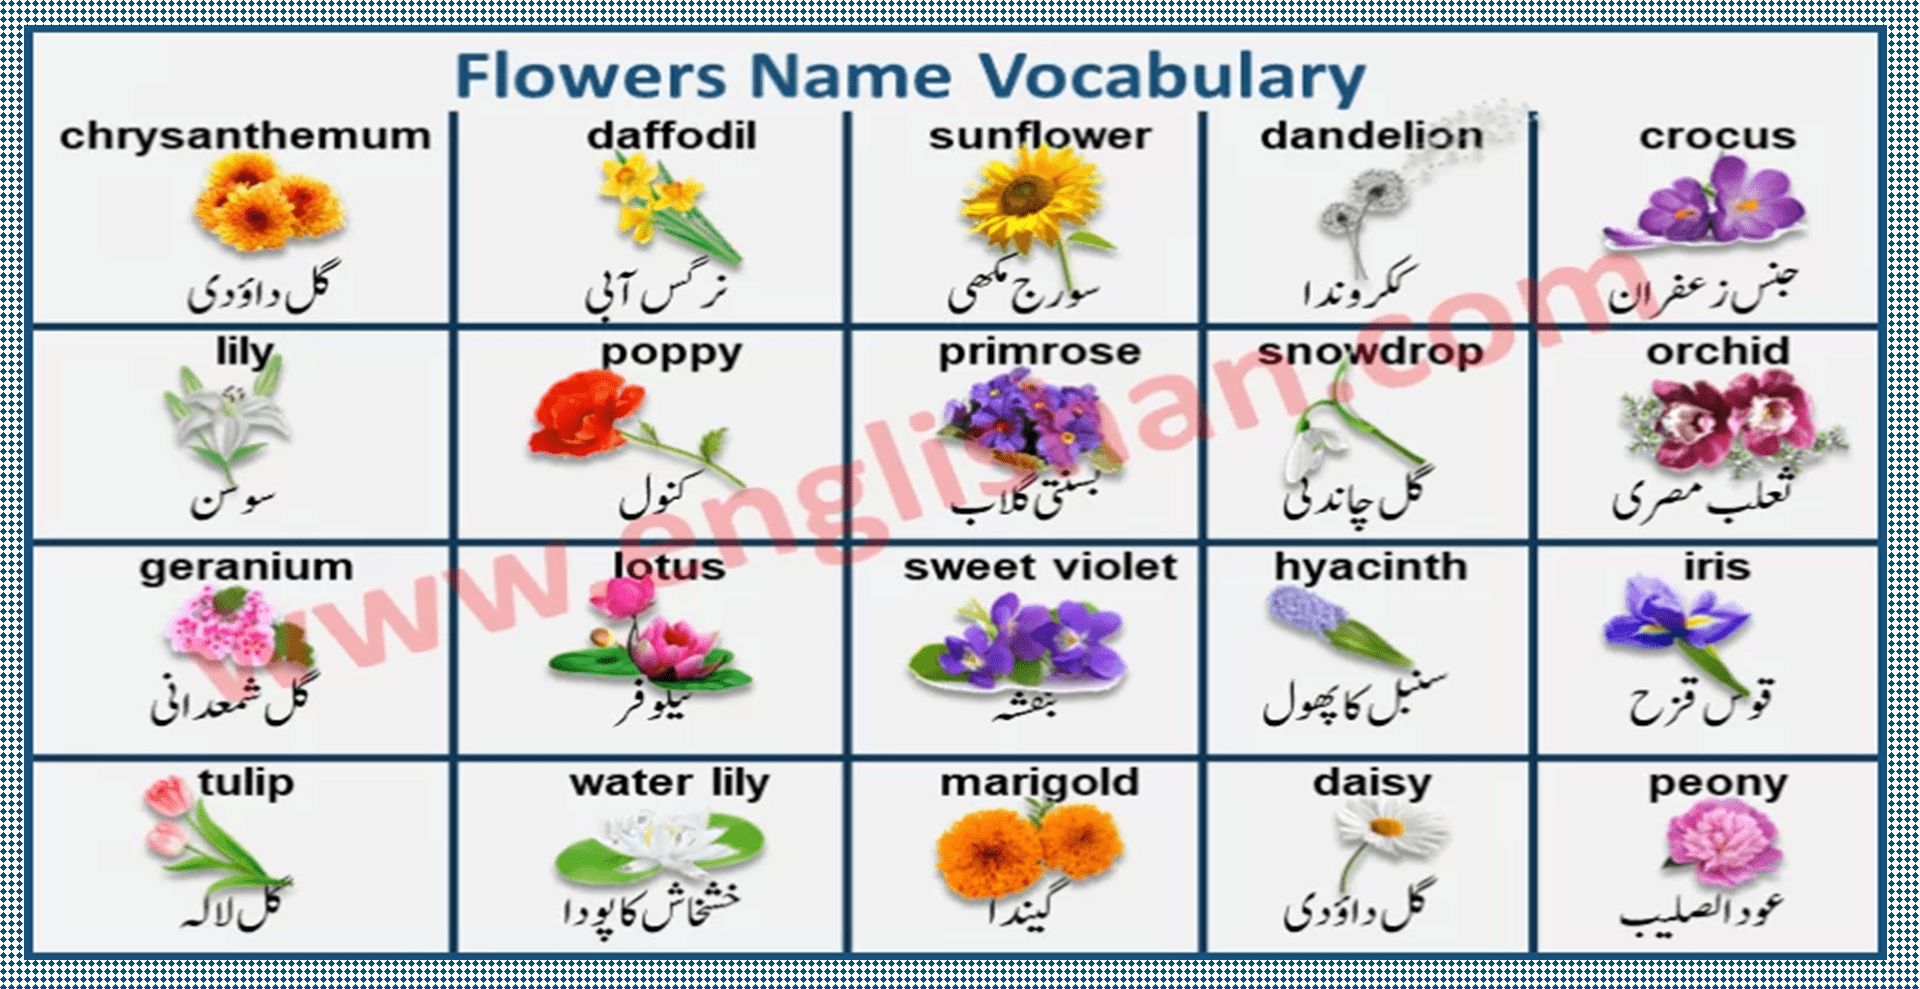 All Flowers Name In English And Urdu | Best Flower Site